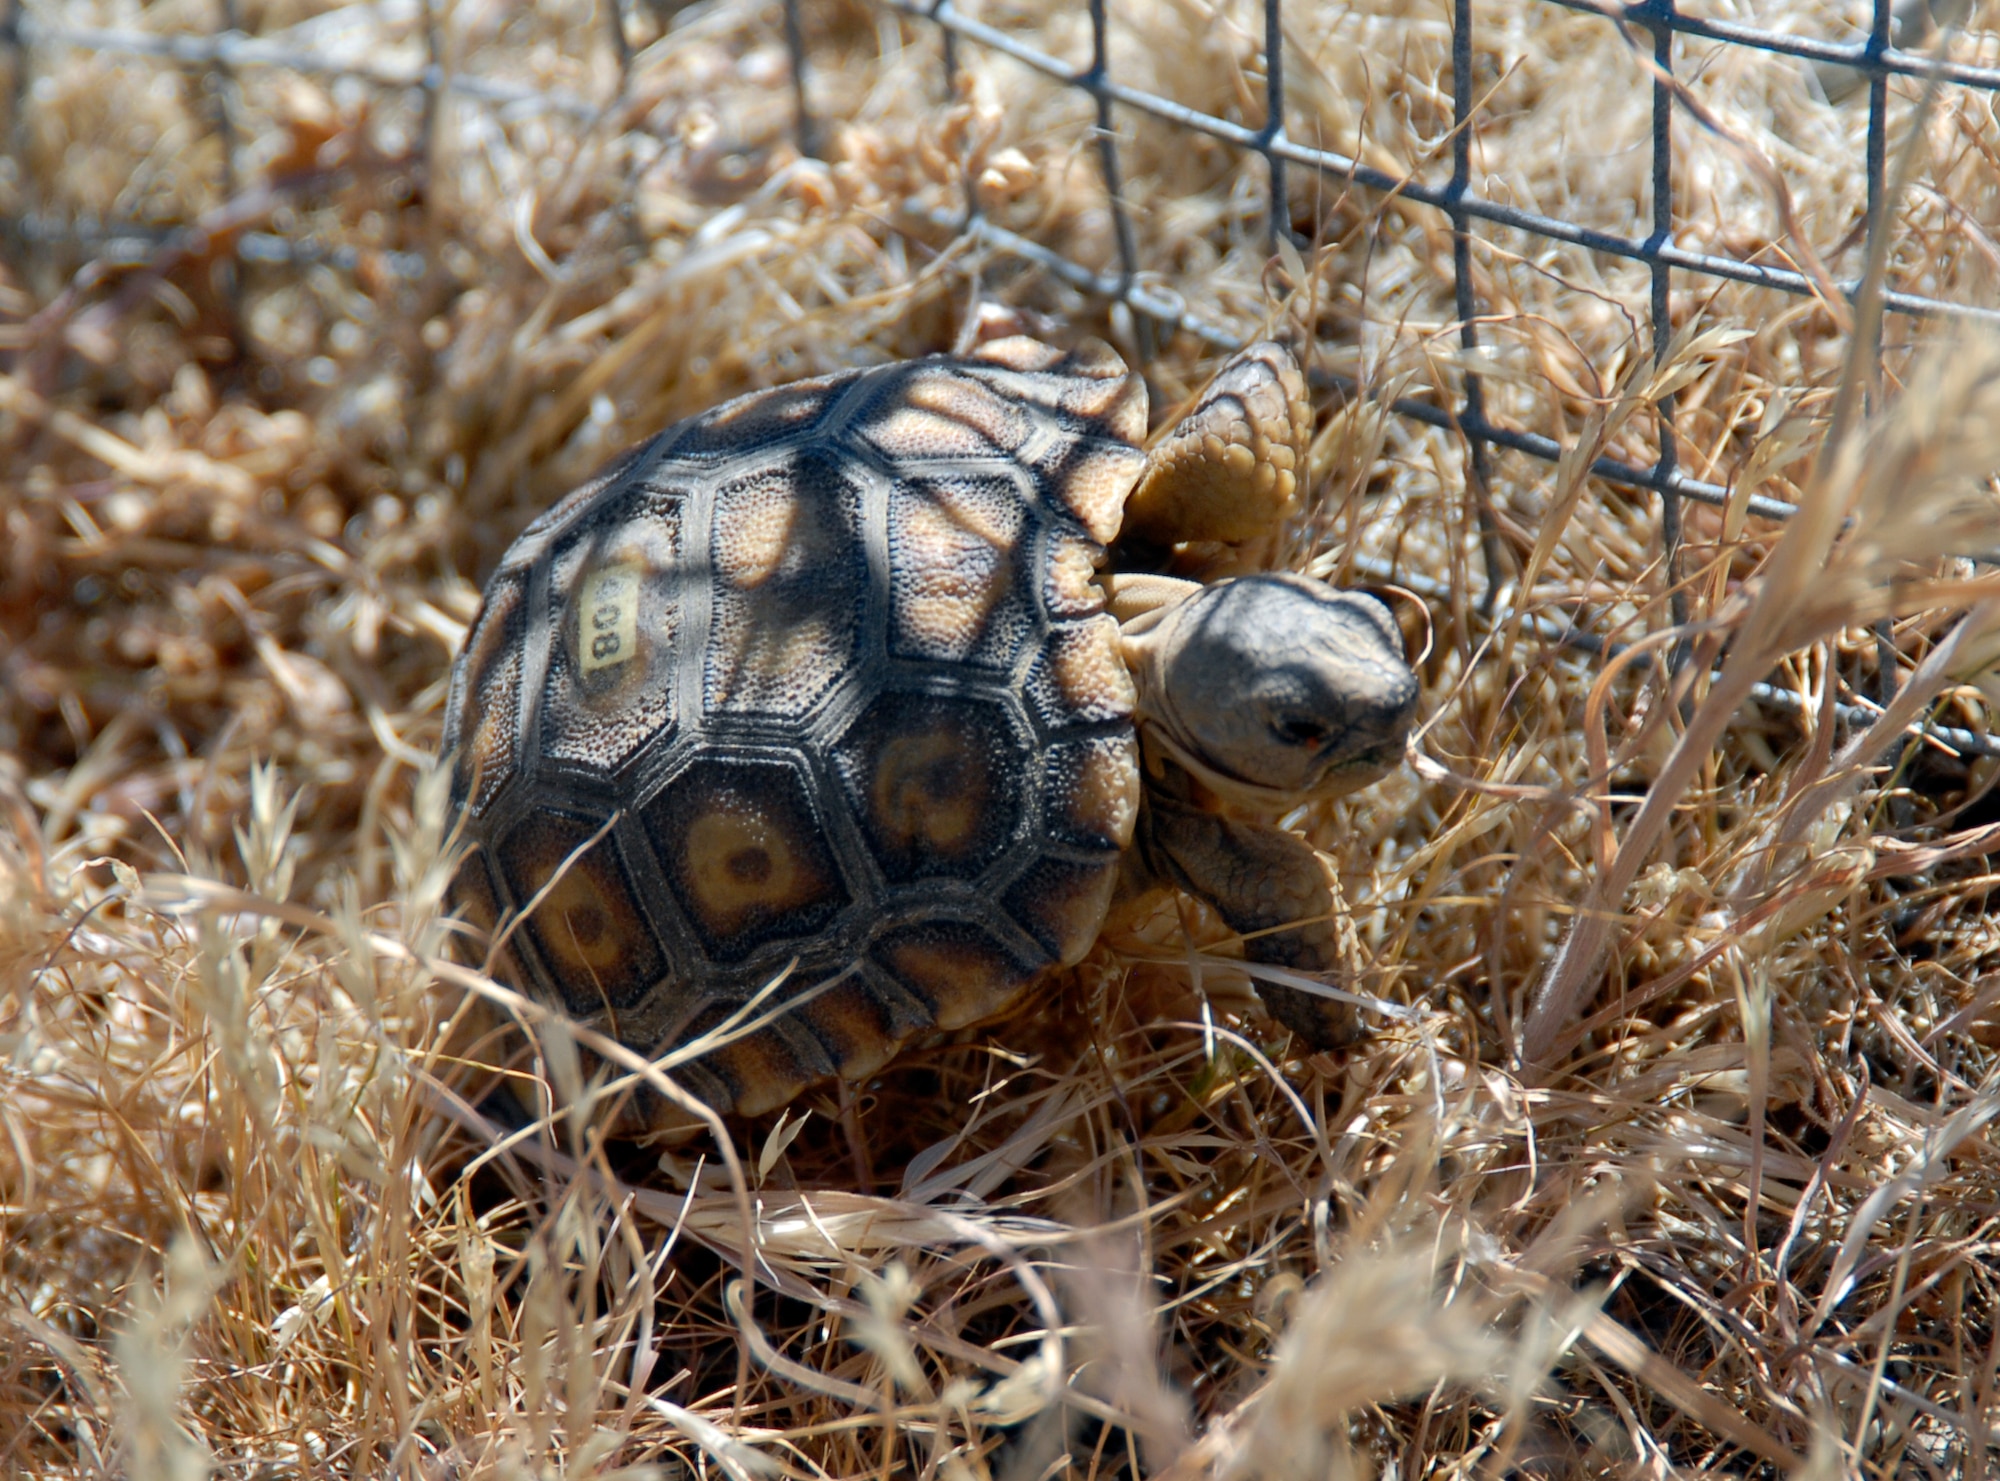 Edwards established the Head Start Program to give desert tortoises a better chance of survival at a young age, The Head Start Program was created four years ago. (Air Force photo by Senior Airman Stacy Sanchez)